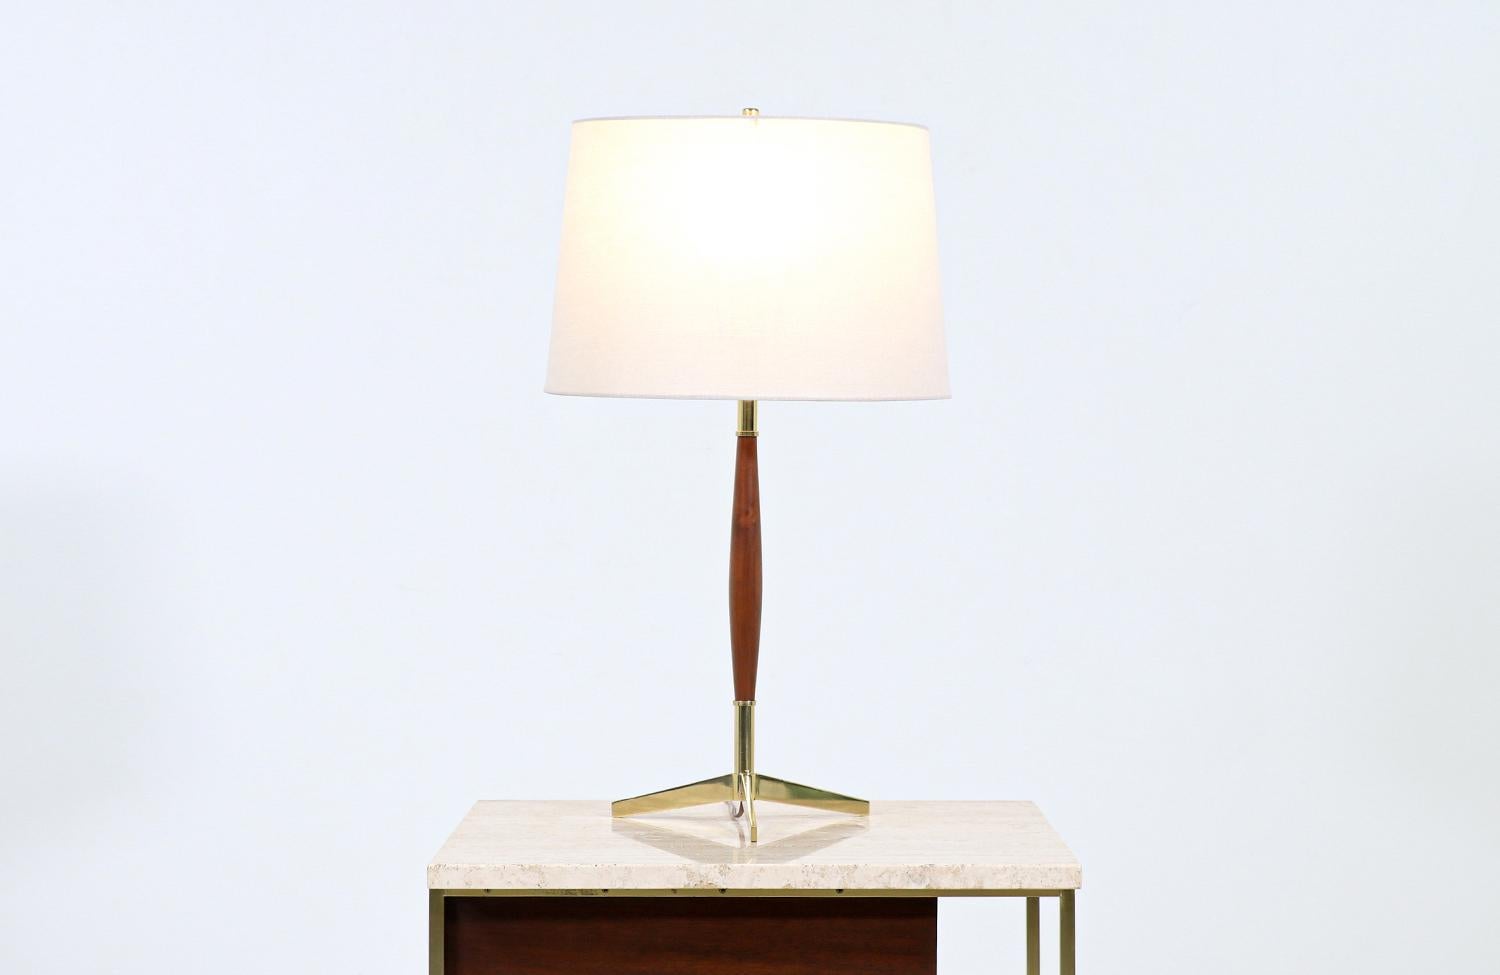 Dimensions:

26in H x 10in W x 10in D
Lamp shade: 10in H x 15in W.

________________________________________

Transforming a piece of Mid-Century Modern furniture is like bringing history back to life, and we take this journey with passion and